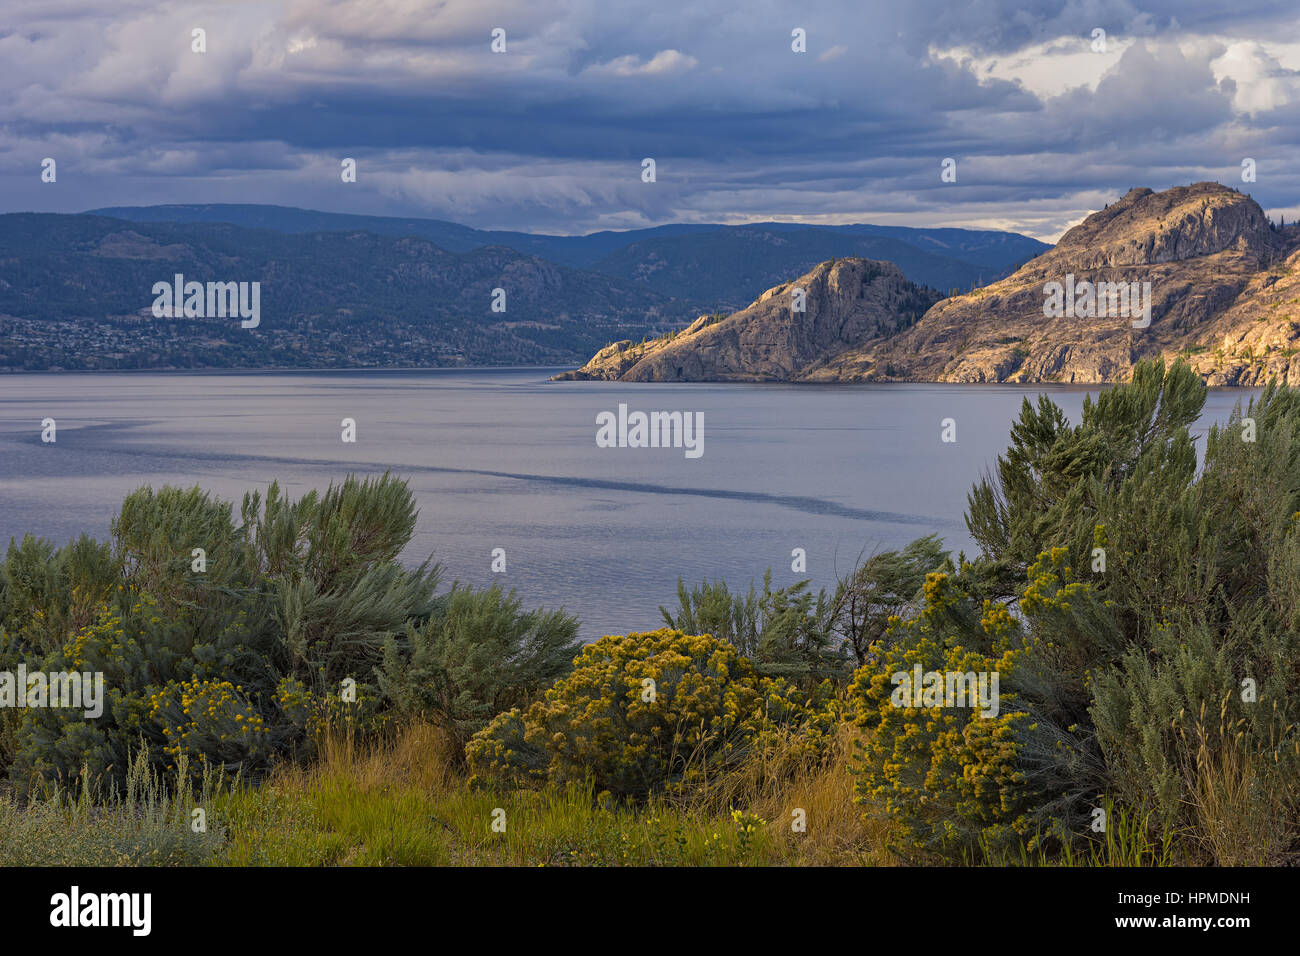 Okanagan Lake near Summerland British Columbia Canada with Sage and Flowers in the Foreground Stock Photo